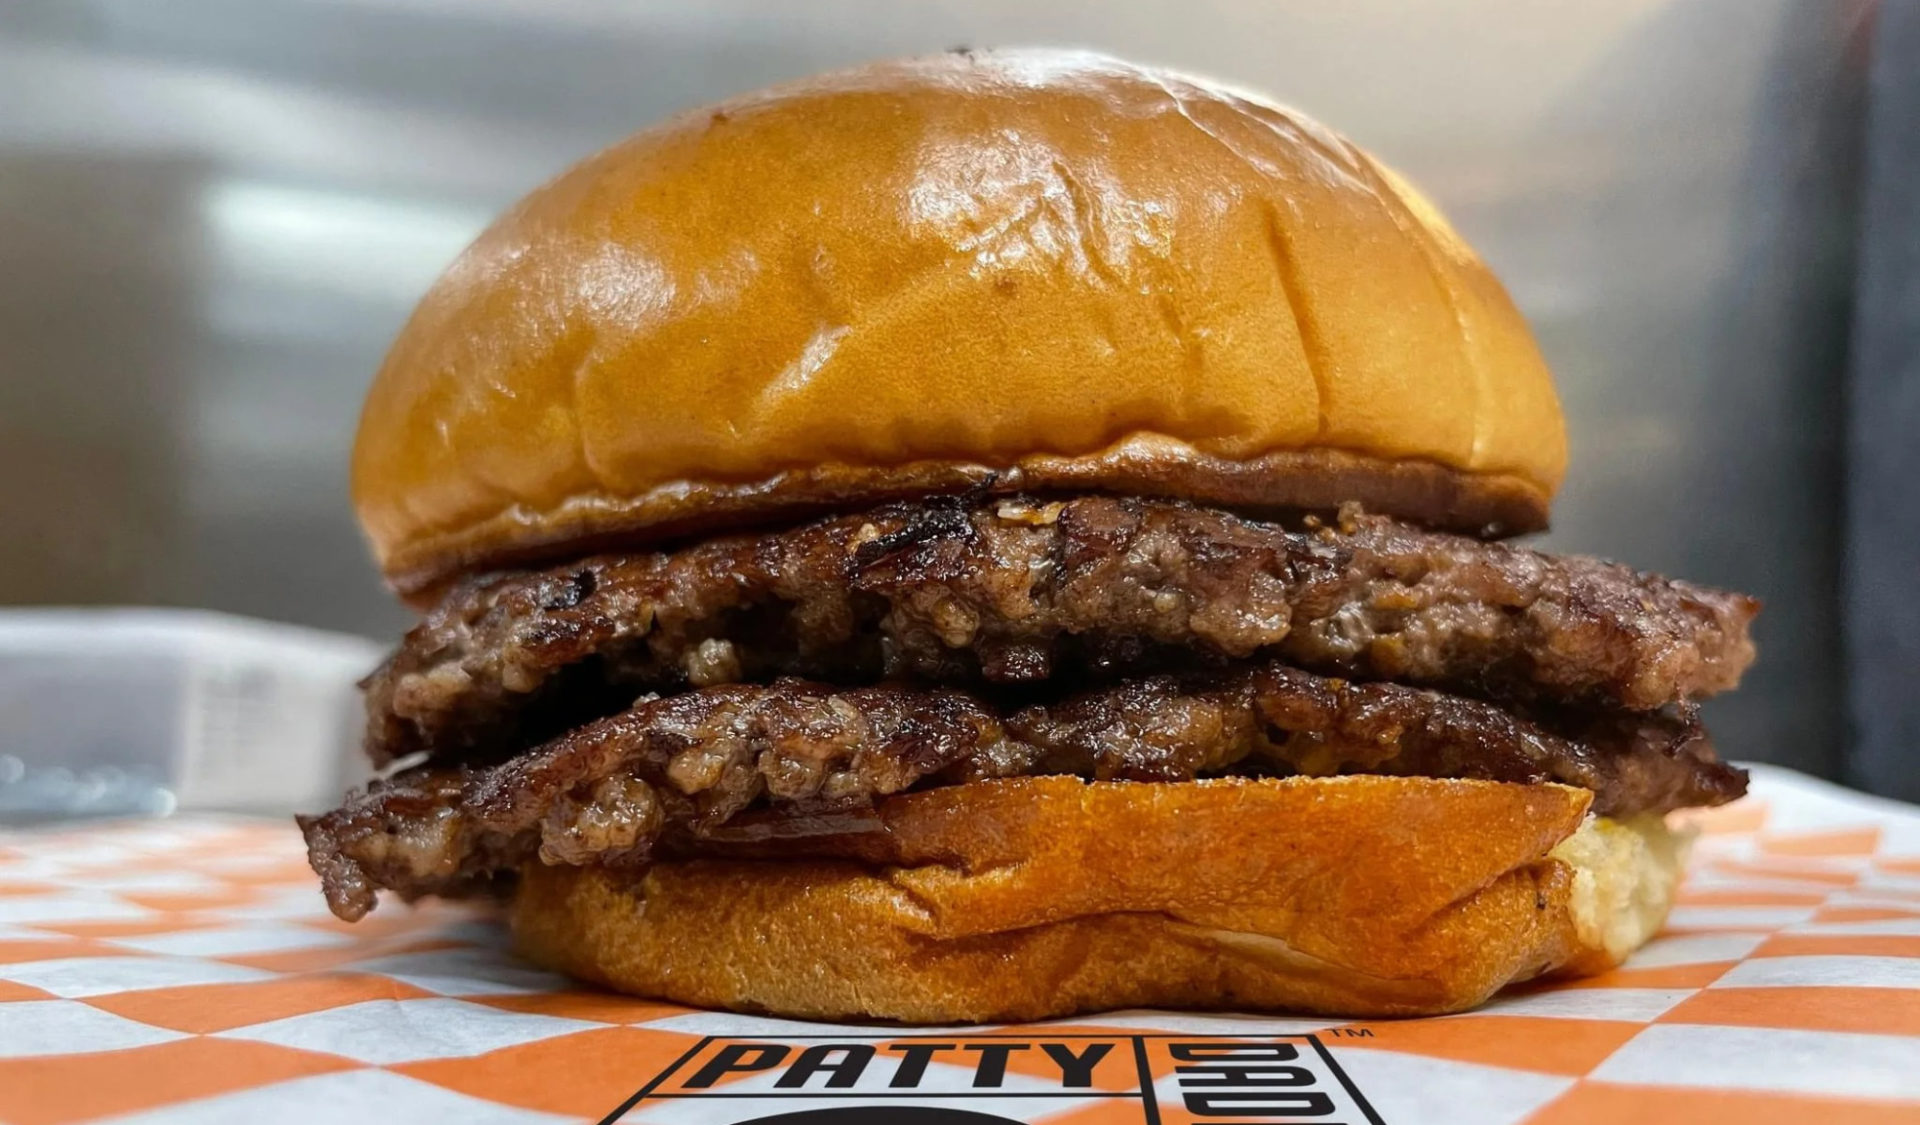 Mahomet has a new burger truck called Patty Daddy’s